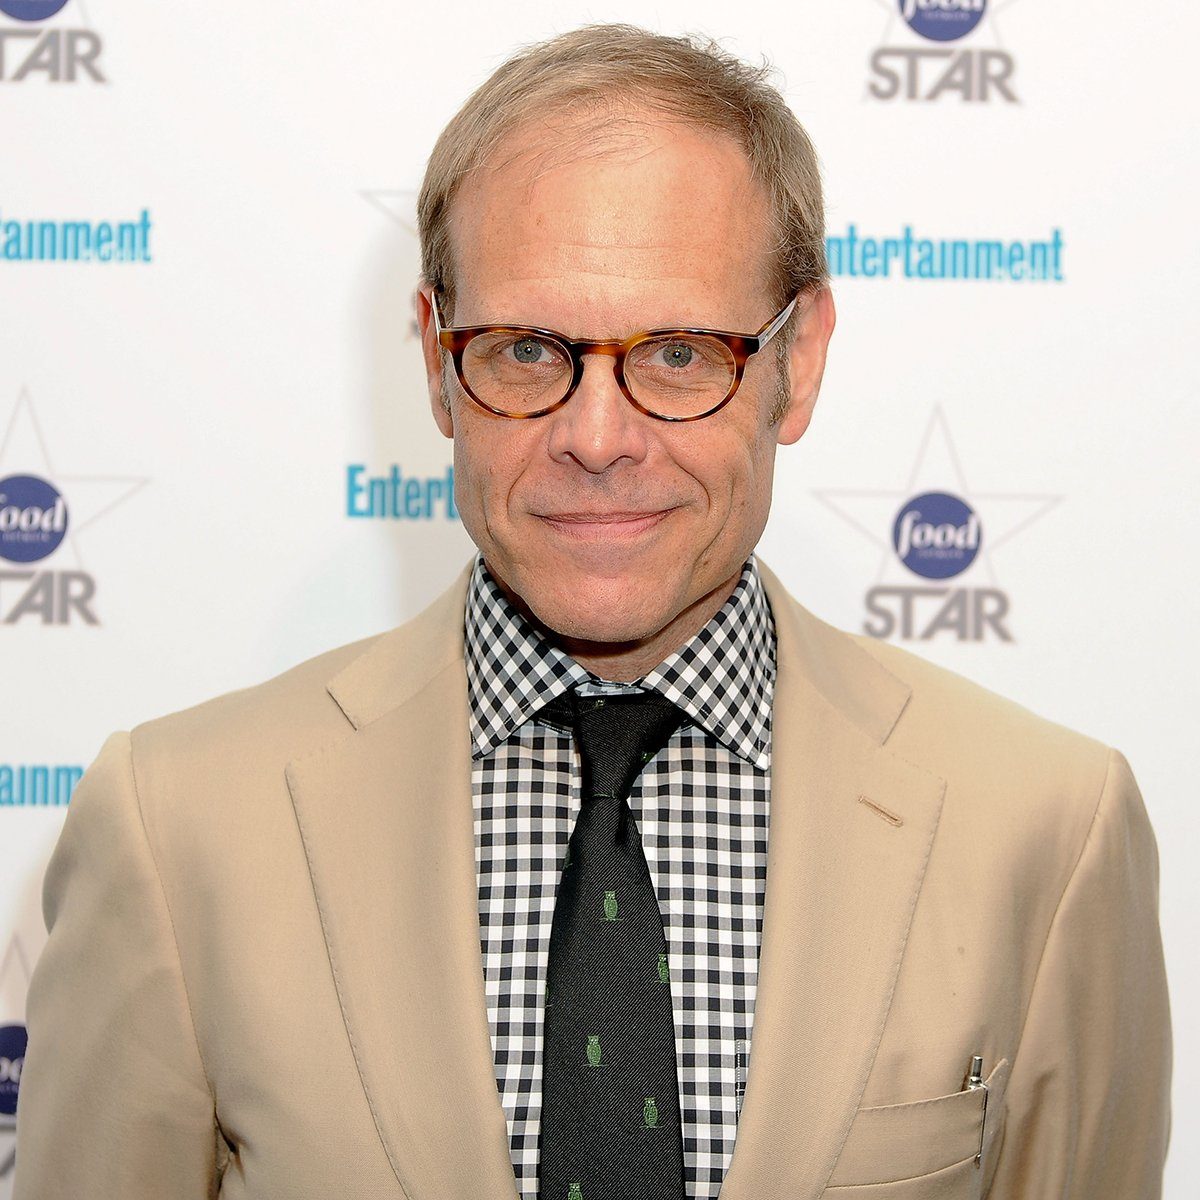 NEW YORK, NY - MAY 08: Alton Brown attends A Night With The Stars of Food Network at 79 Crosby Street on May 8, 2012 in New York City. (Photo by Jude Domski/WireImage)